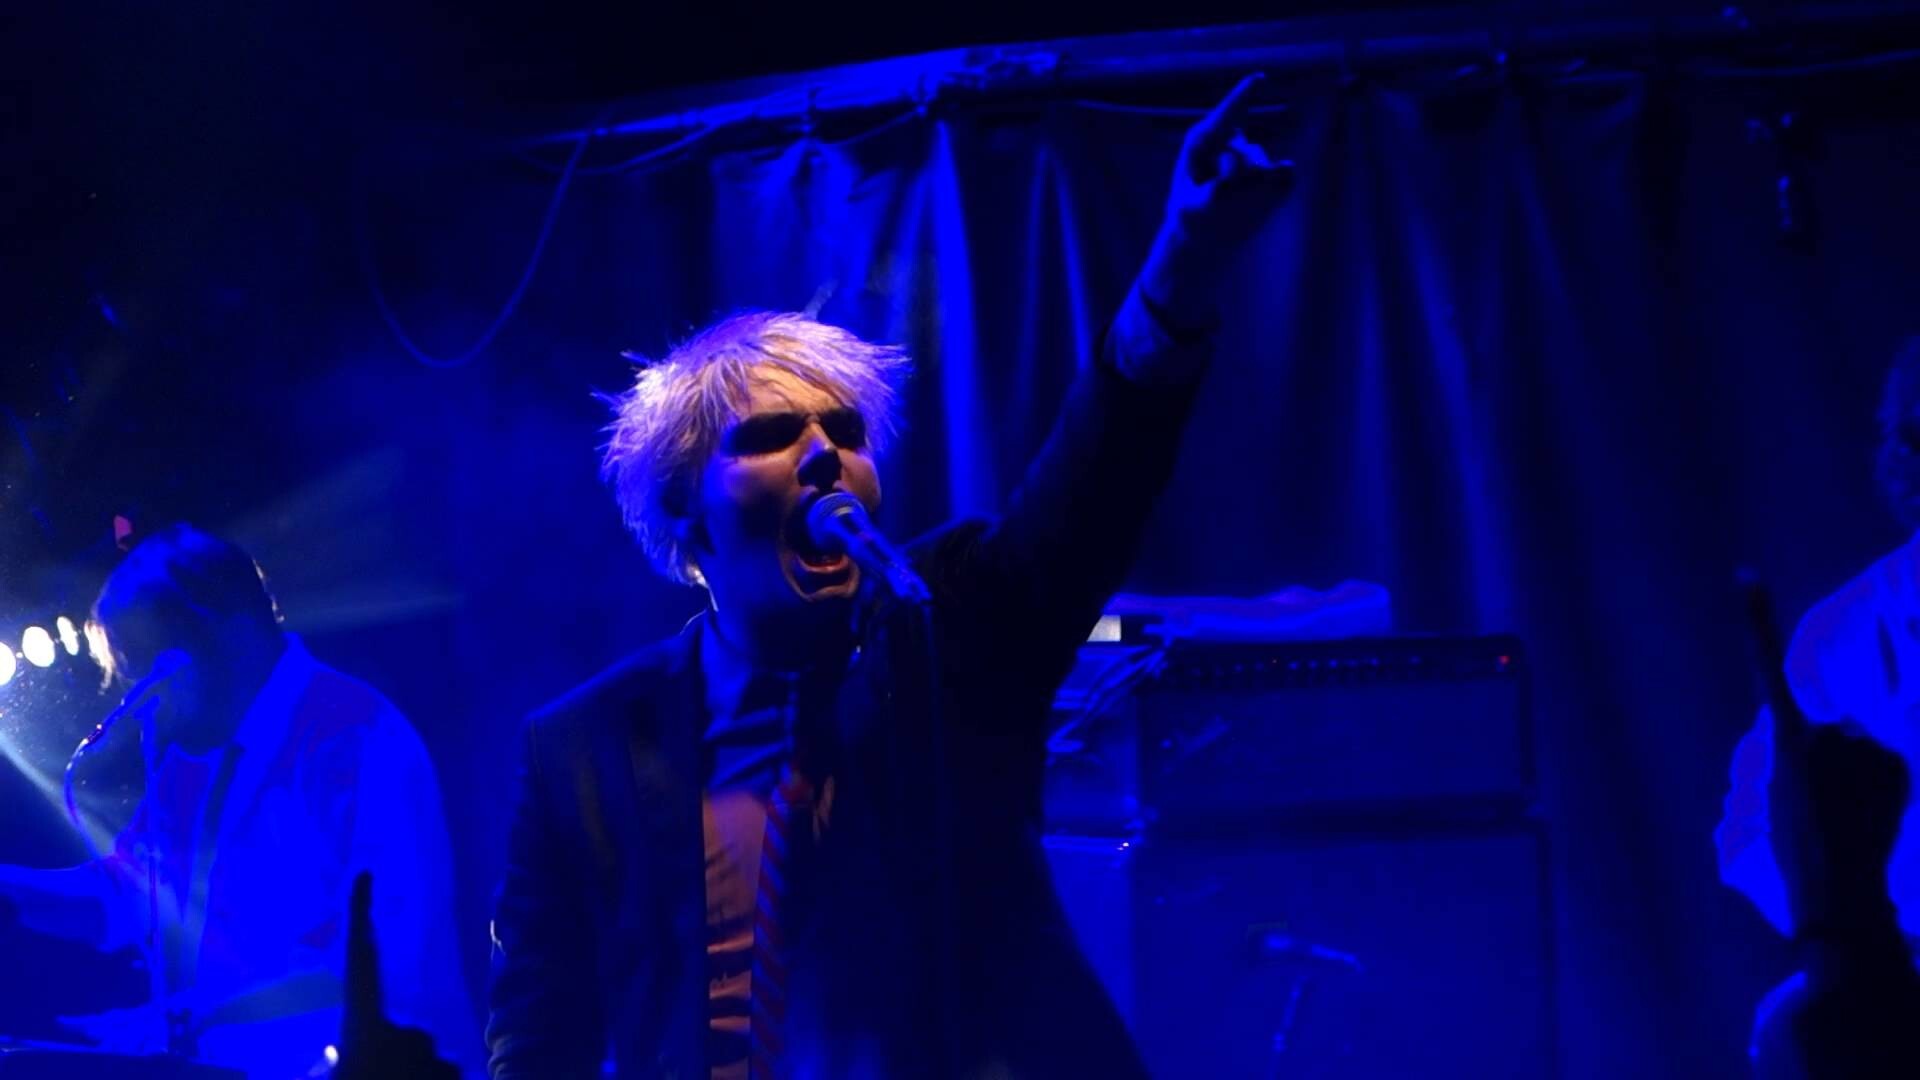 Gerard Way: Rock concert, Stage performance, The lead vocalist of the rock band My Chemical Romance. 1920x1080 Full HD Wallpaper.